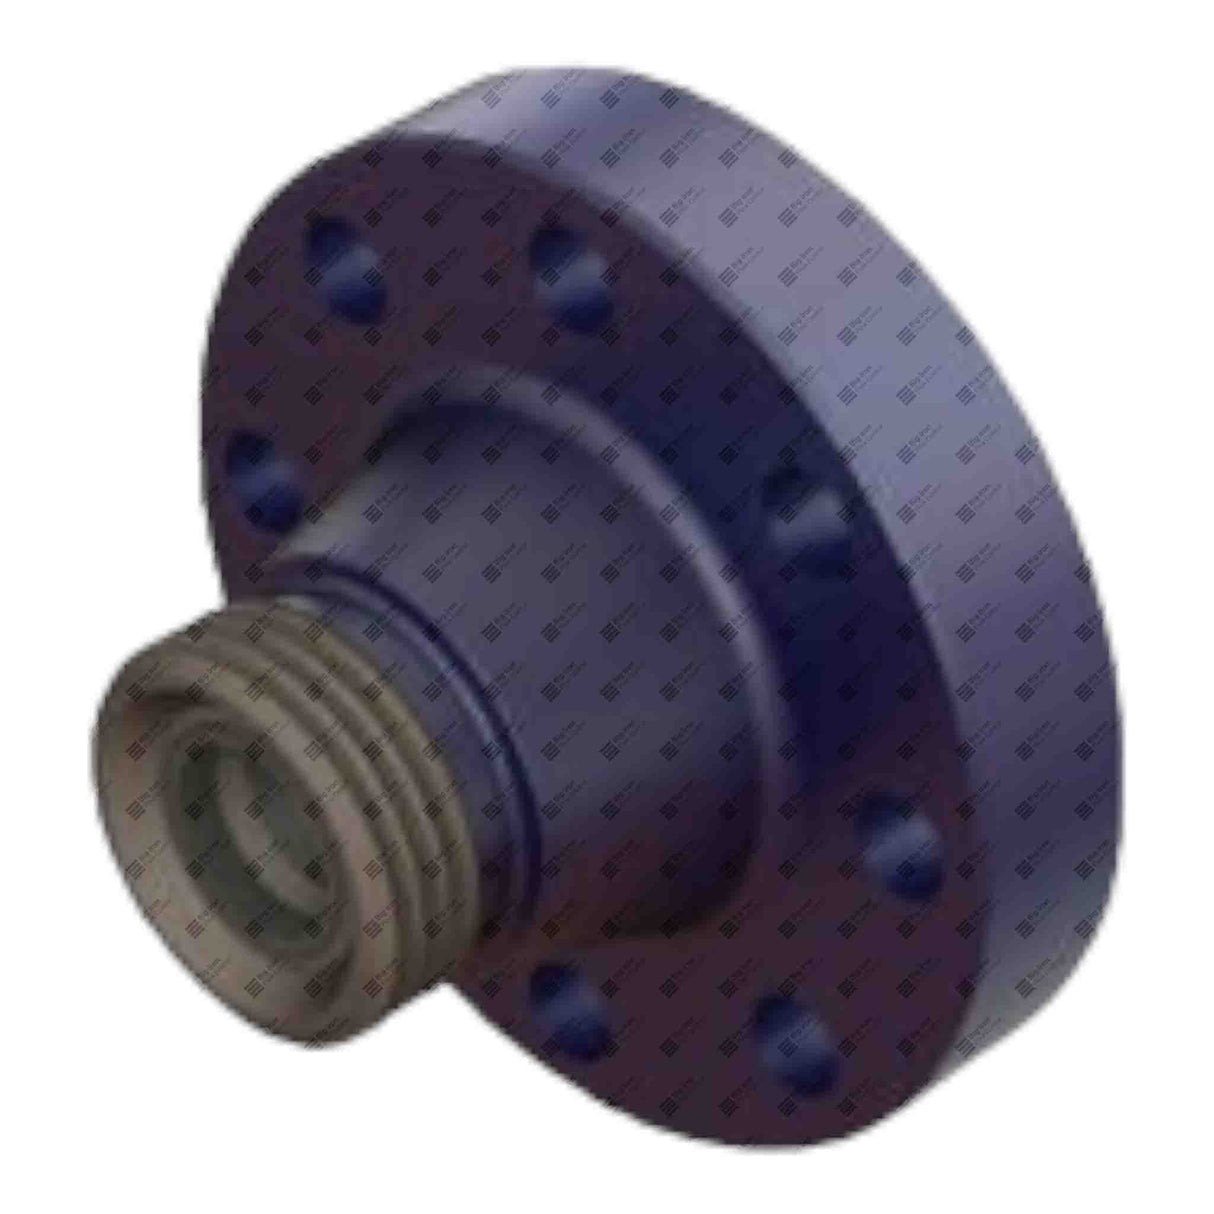 Flange Adapter, 3-1/16” 10M x 2” 1502 F, 10000 psi, Sour Service